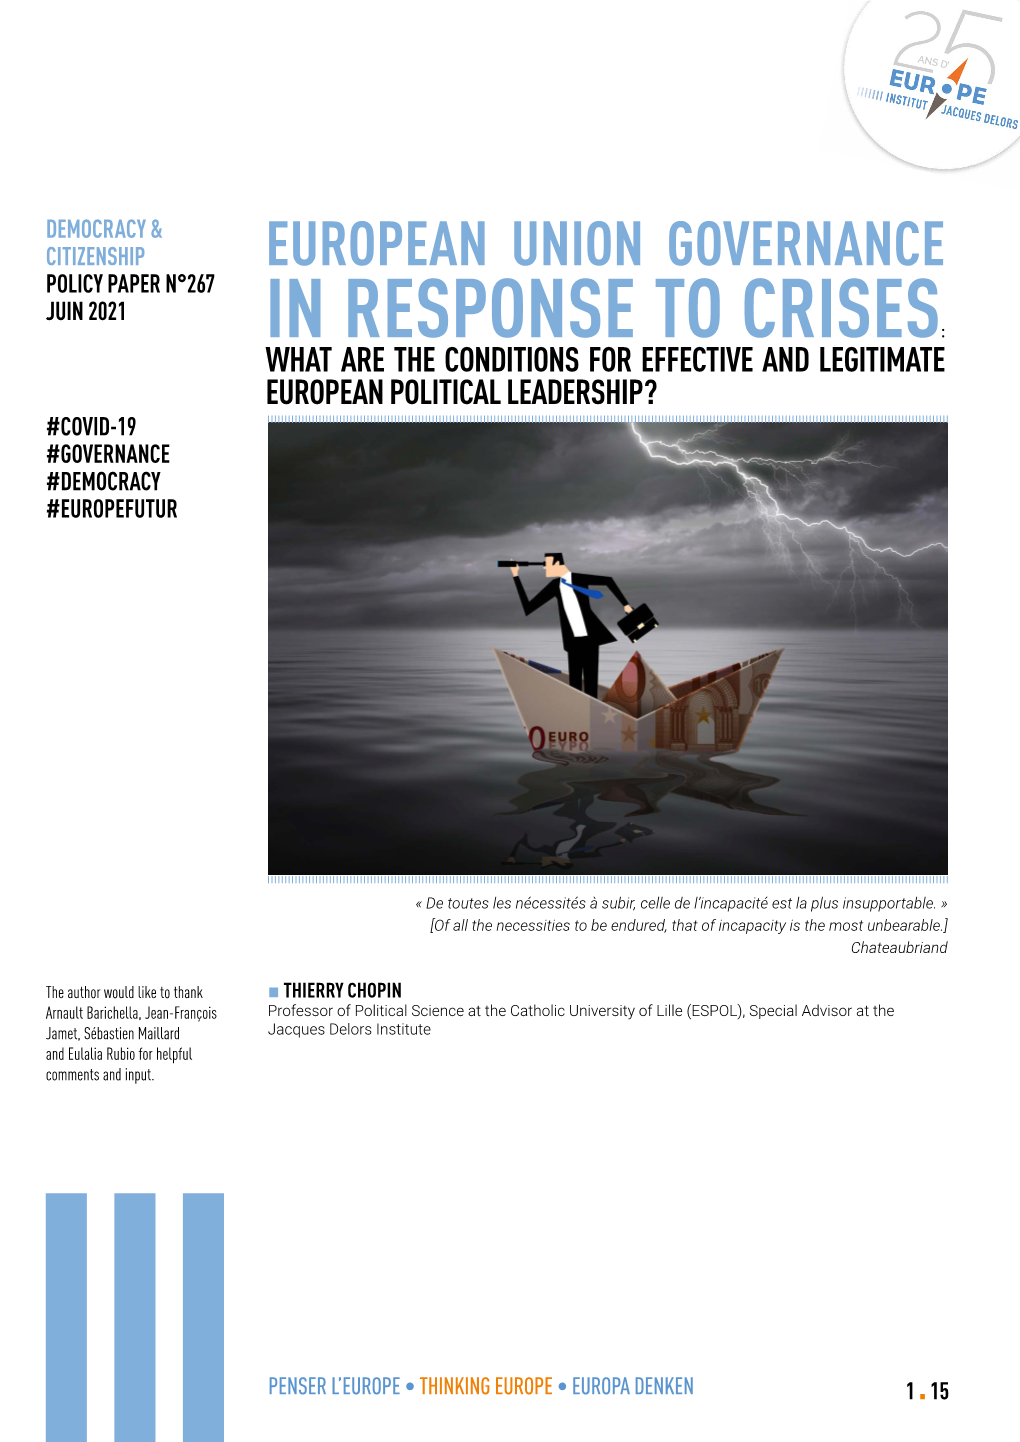 In Response to Crises: What Are the Conditions for Effective and Legitimate European Political Leadership? #Covid-19 #Governance #Democracy #Europefutur